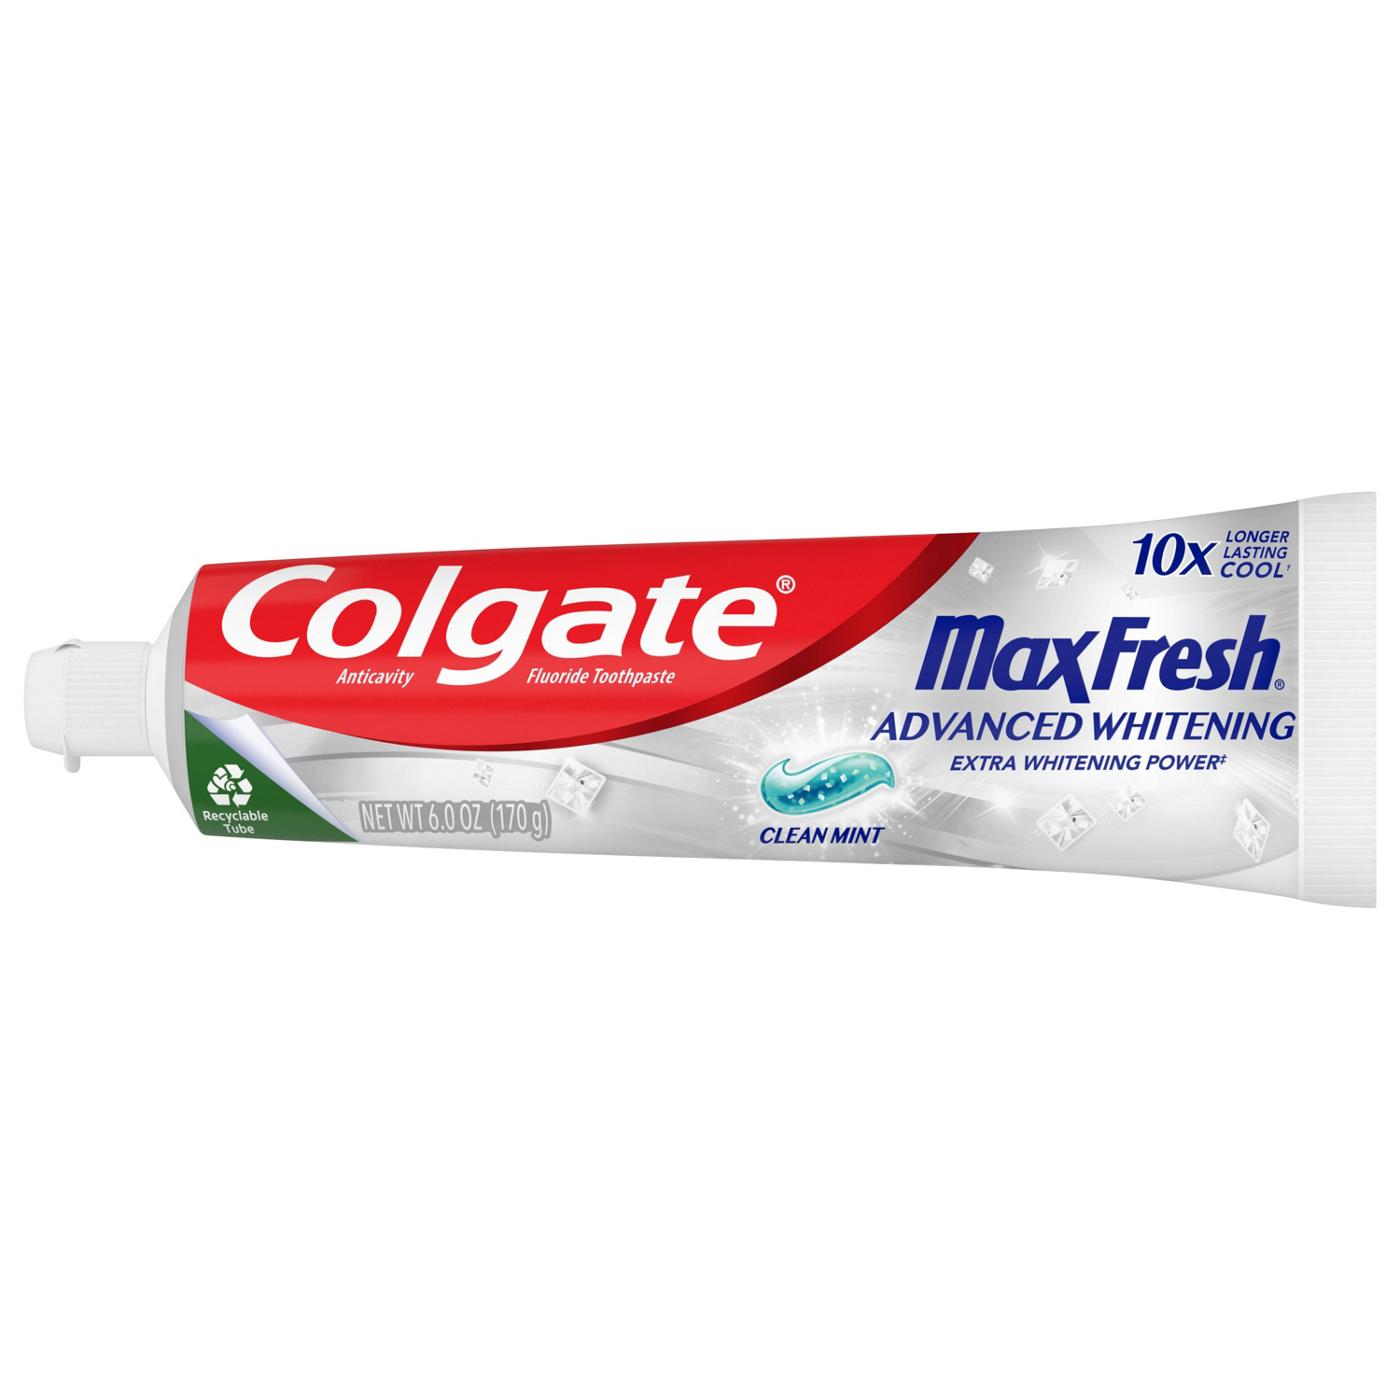 Colgate Max Fresh Anticavity Toothpaste - Clean Mint; image 10 of 10